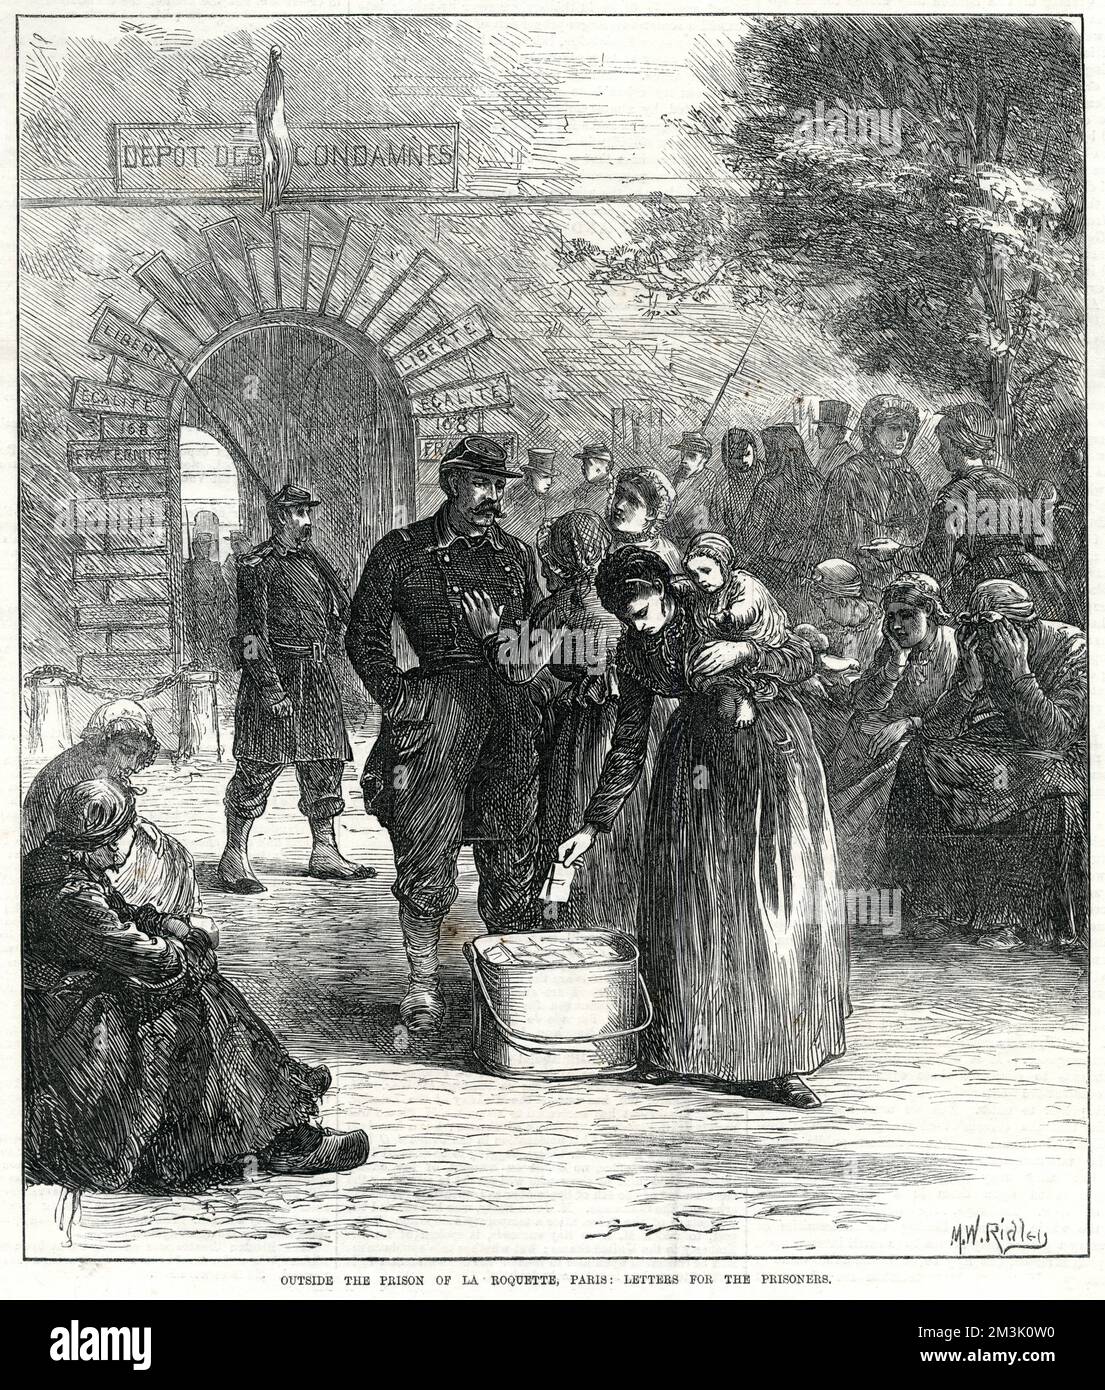 Wives and mothers of prisoners being held in La Roquette prison, at the end of the Paris Commune, 1871. These women had come to the gaol with letters for their loved ones, locked up inside.  With the fall of the Commune, the French Army imprisoned and executed thousands in a purge of socialists in Paris. Stock Photo